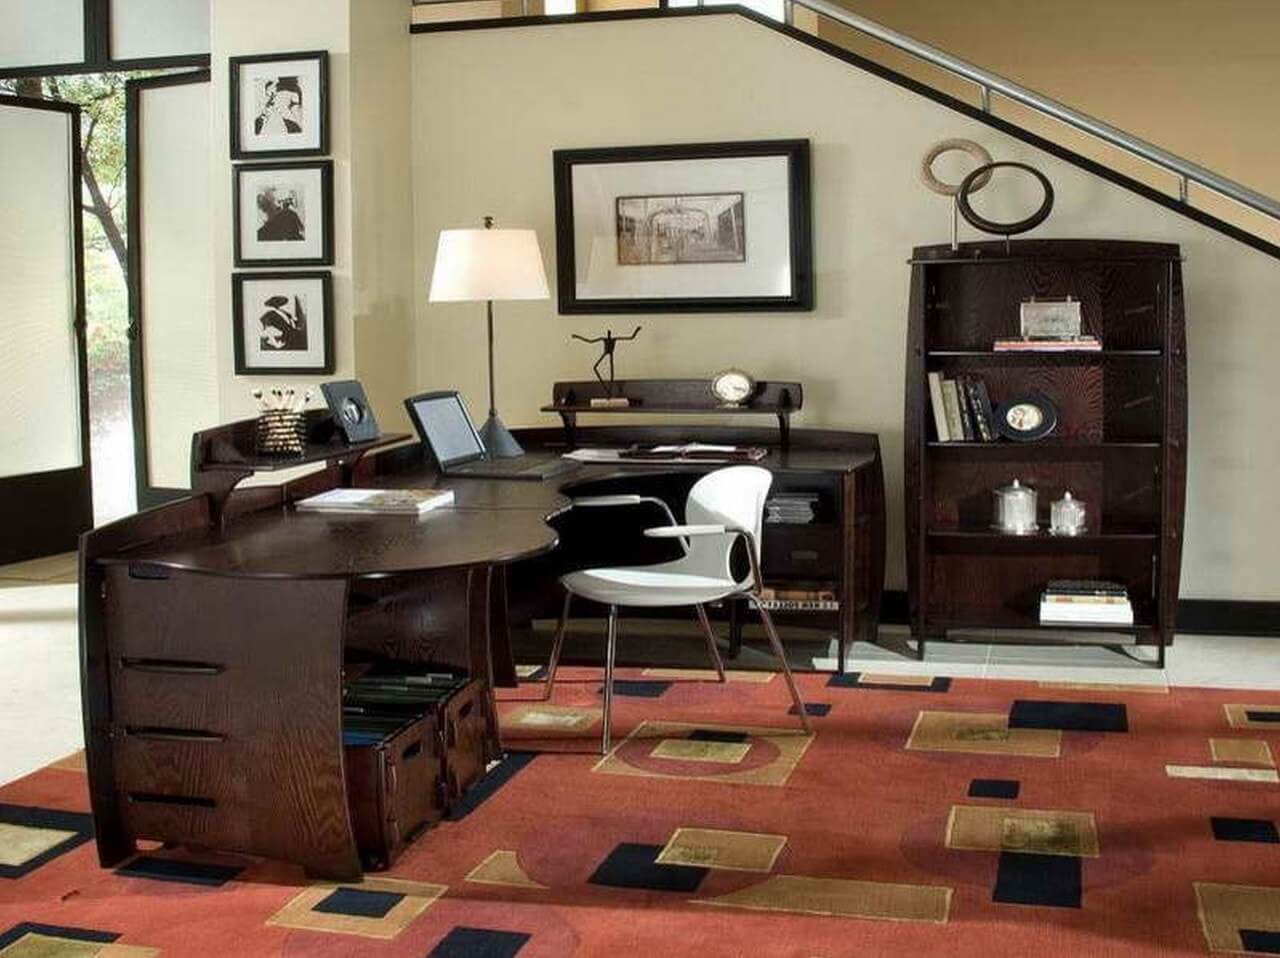 Home-Office-Color-Ideas-with-hardwood-material-Elegant-Home-Office-Decoration-Winning-office-decorating-ideas-for-work-Rustic-Style-1280x958